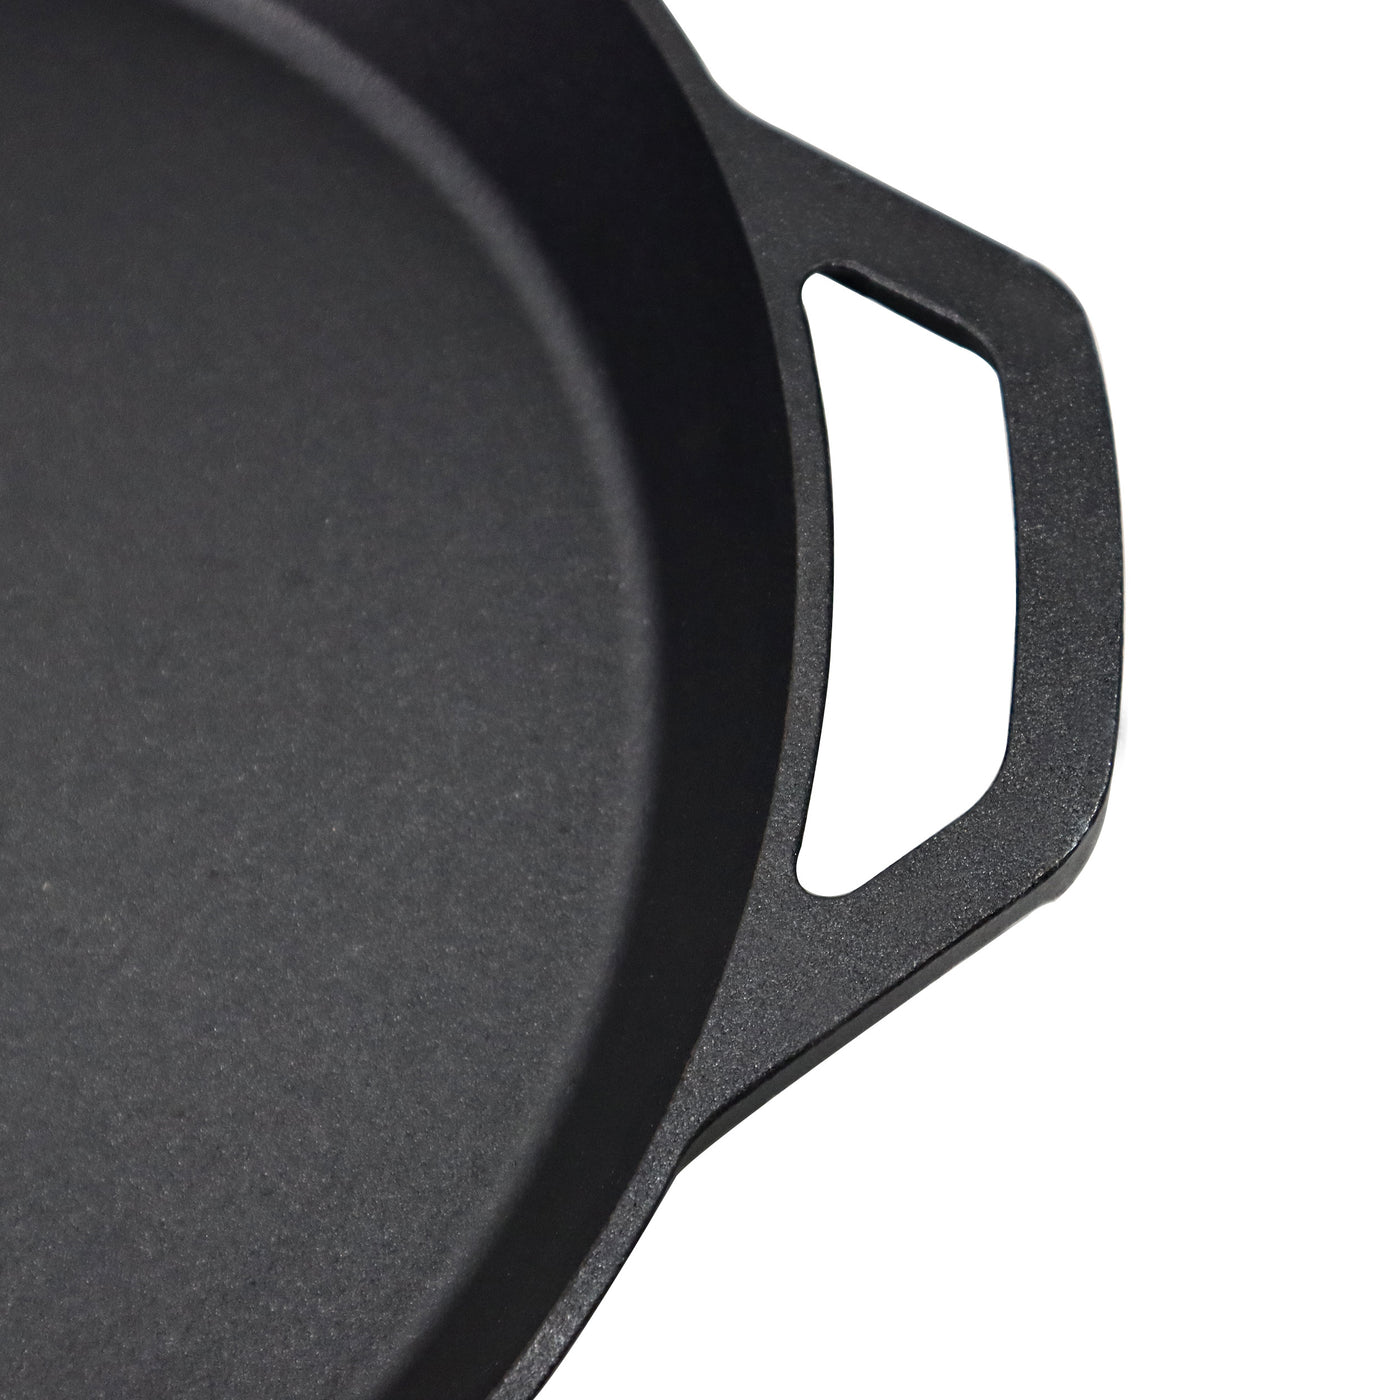 15.75-Inch (40 cm) Cast Iron Skillet Set with Dual Loop Handles, Frying Pan, Silicone Potholders